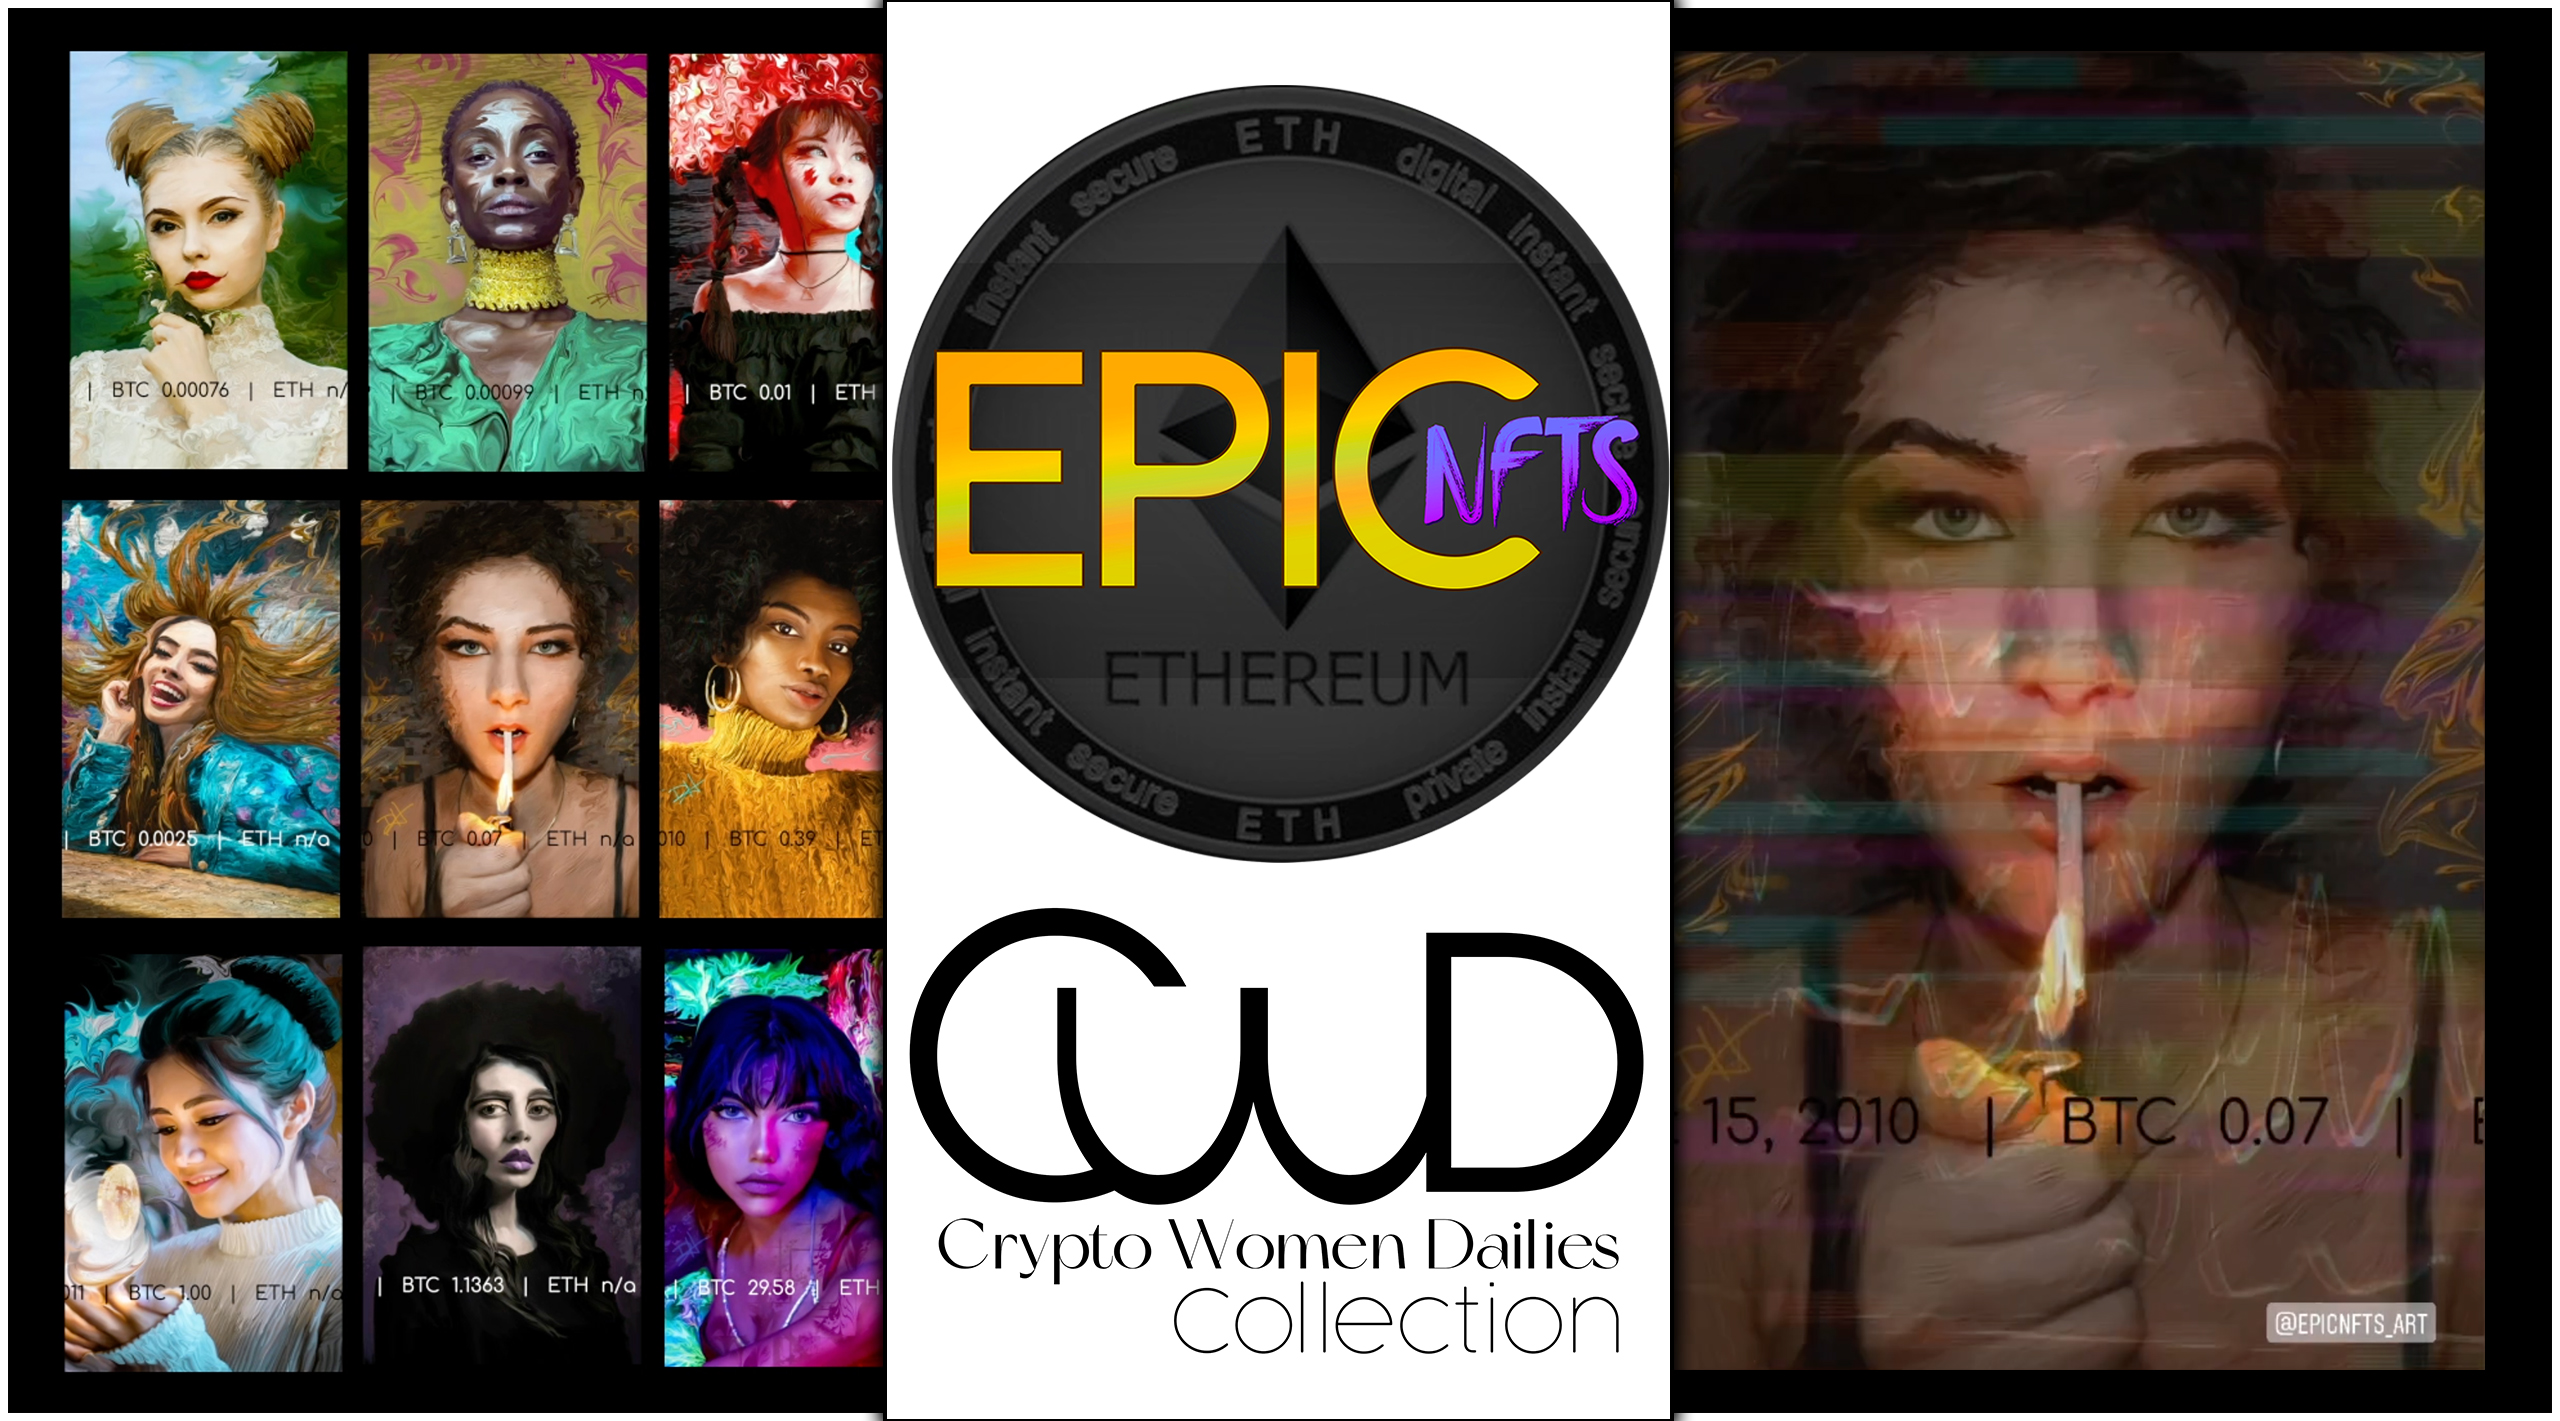 Crypto Women Dailies  |  2010 August 15 – Bitcoin Forked After One Time Security Glitch